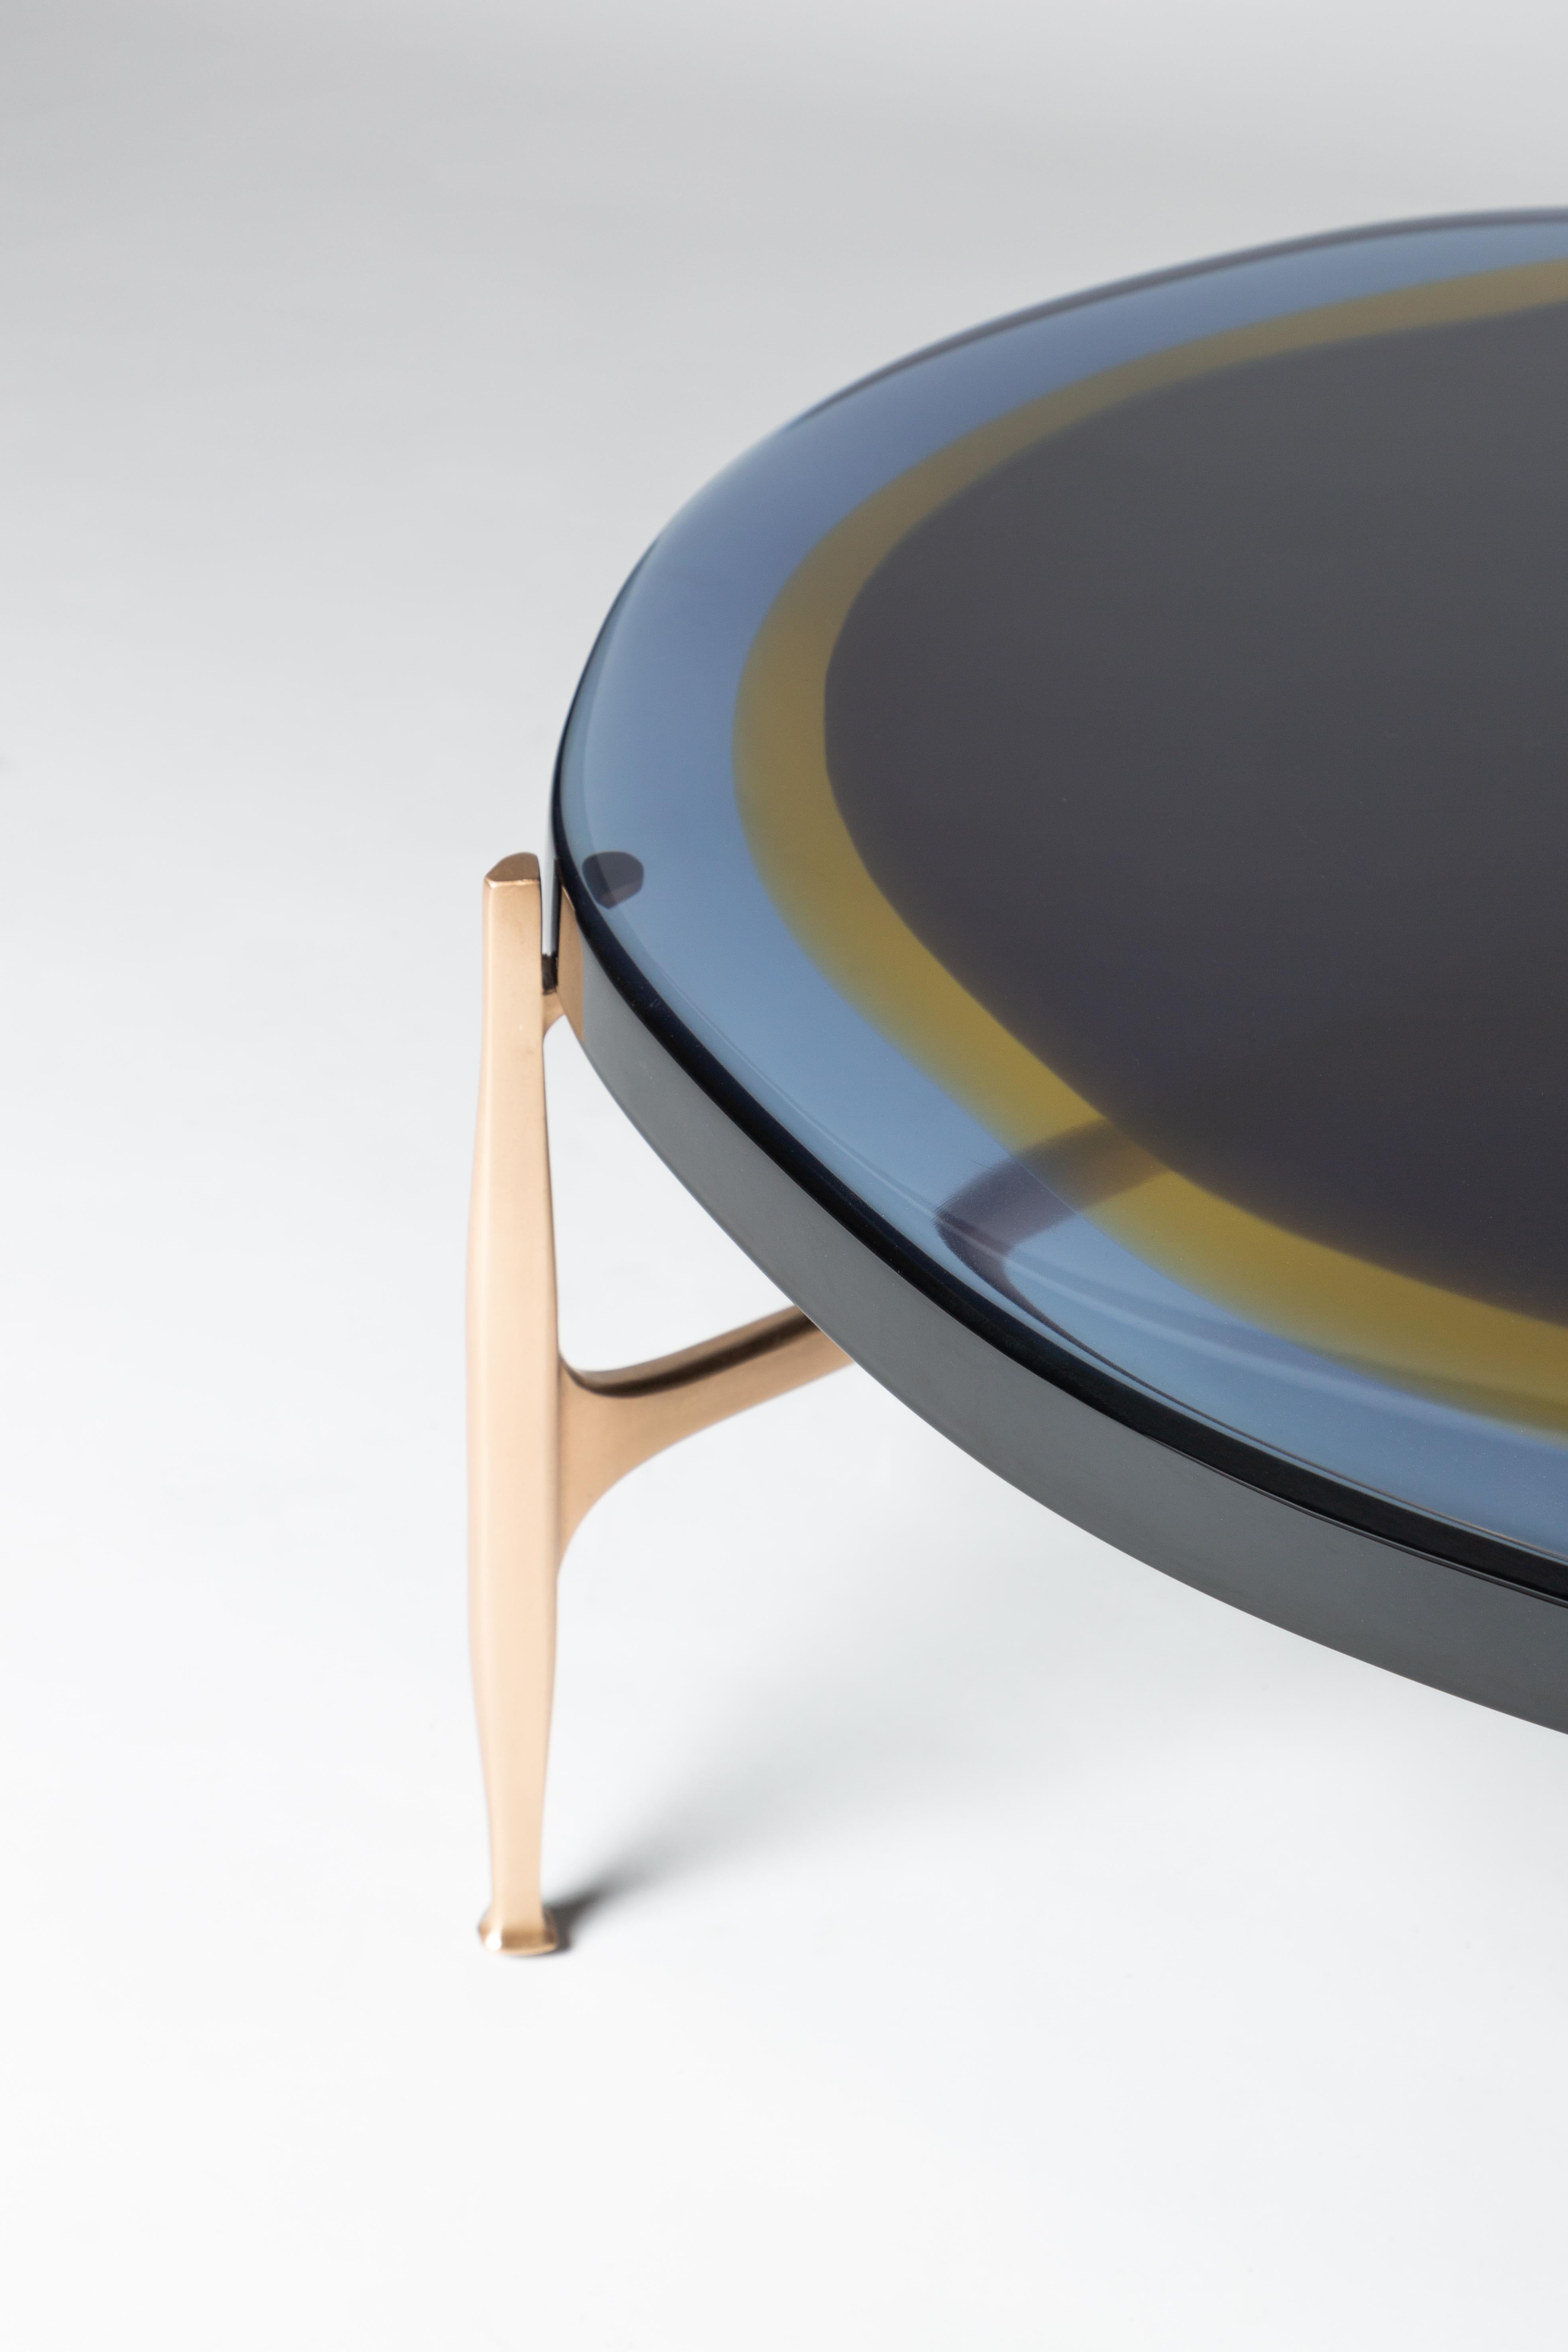 With an irregular circular top crafted from transparent and colorful resin, arranged in a staggered pattern on a bronze frame, this table plays with light. The production process entails a specialized resin-casting technique. The material is layered